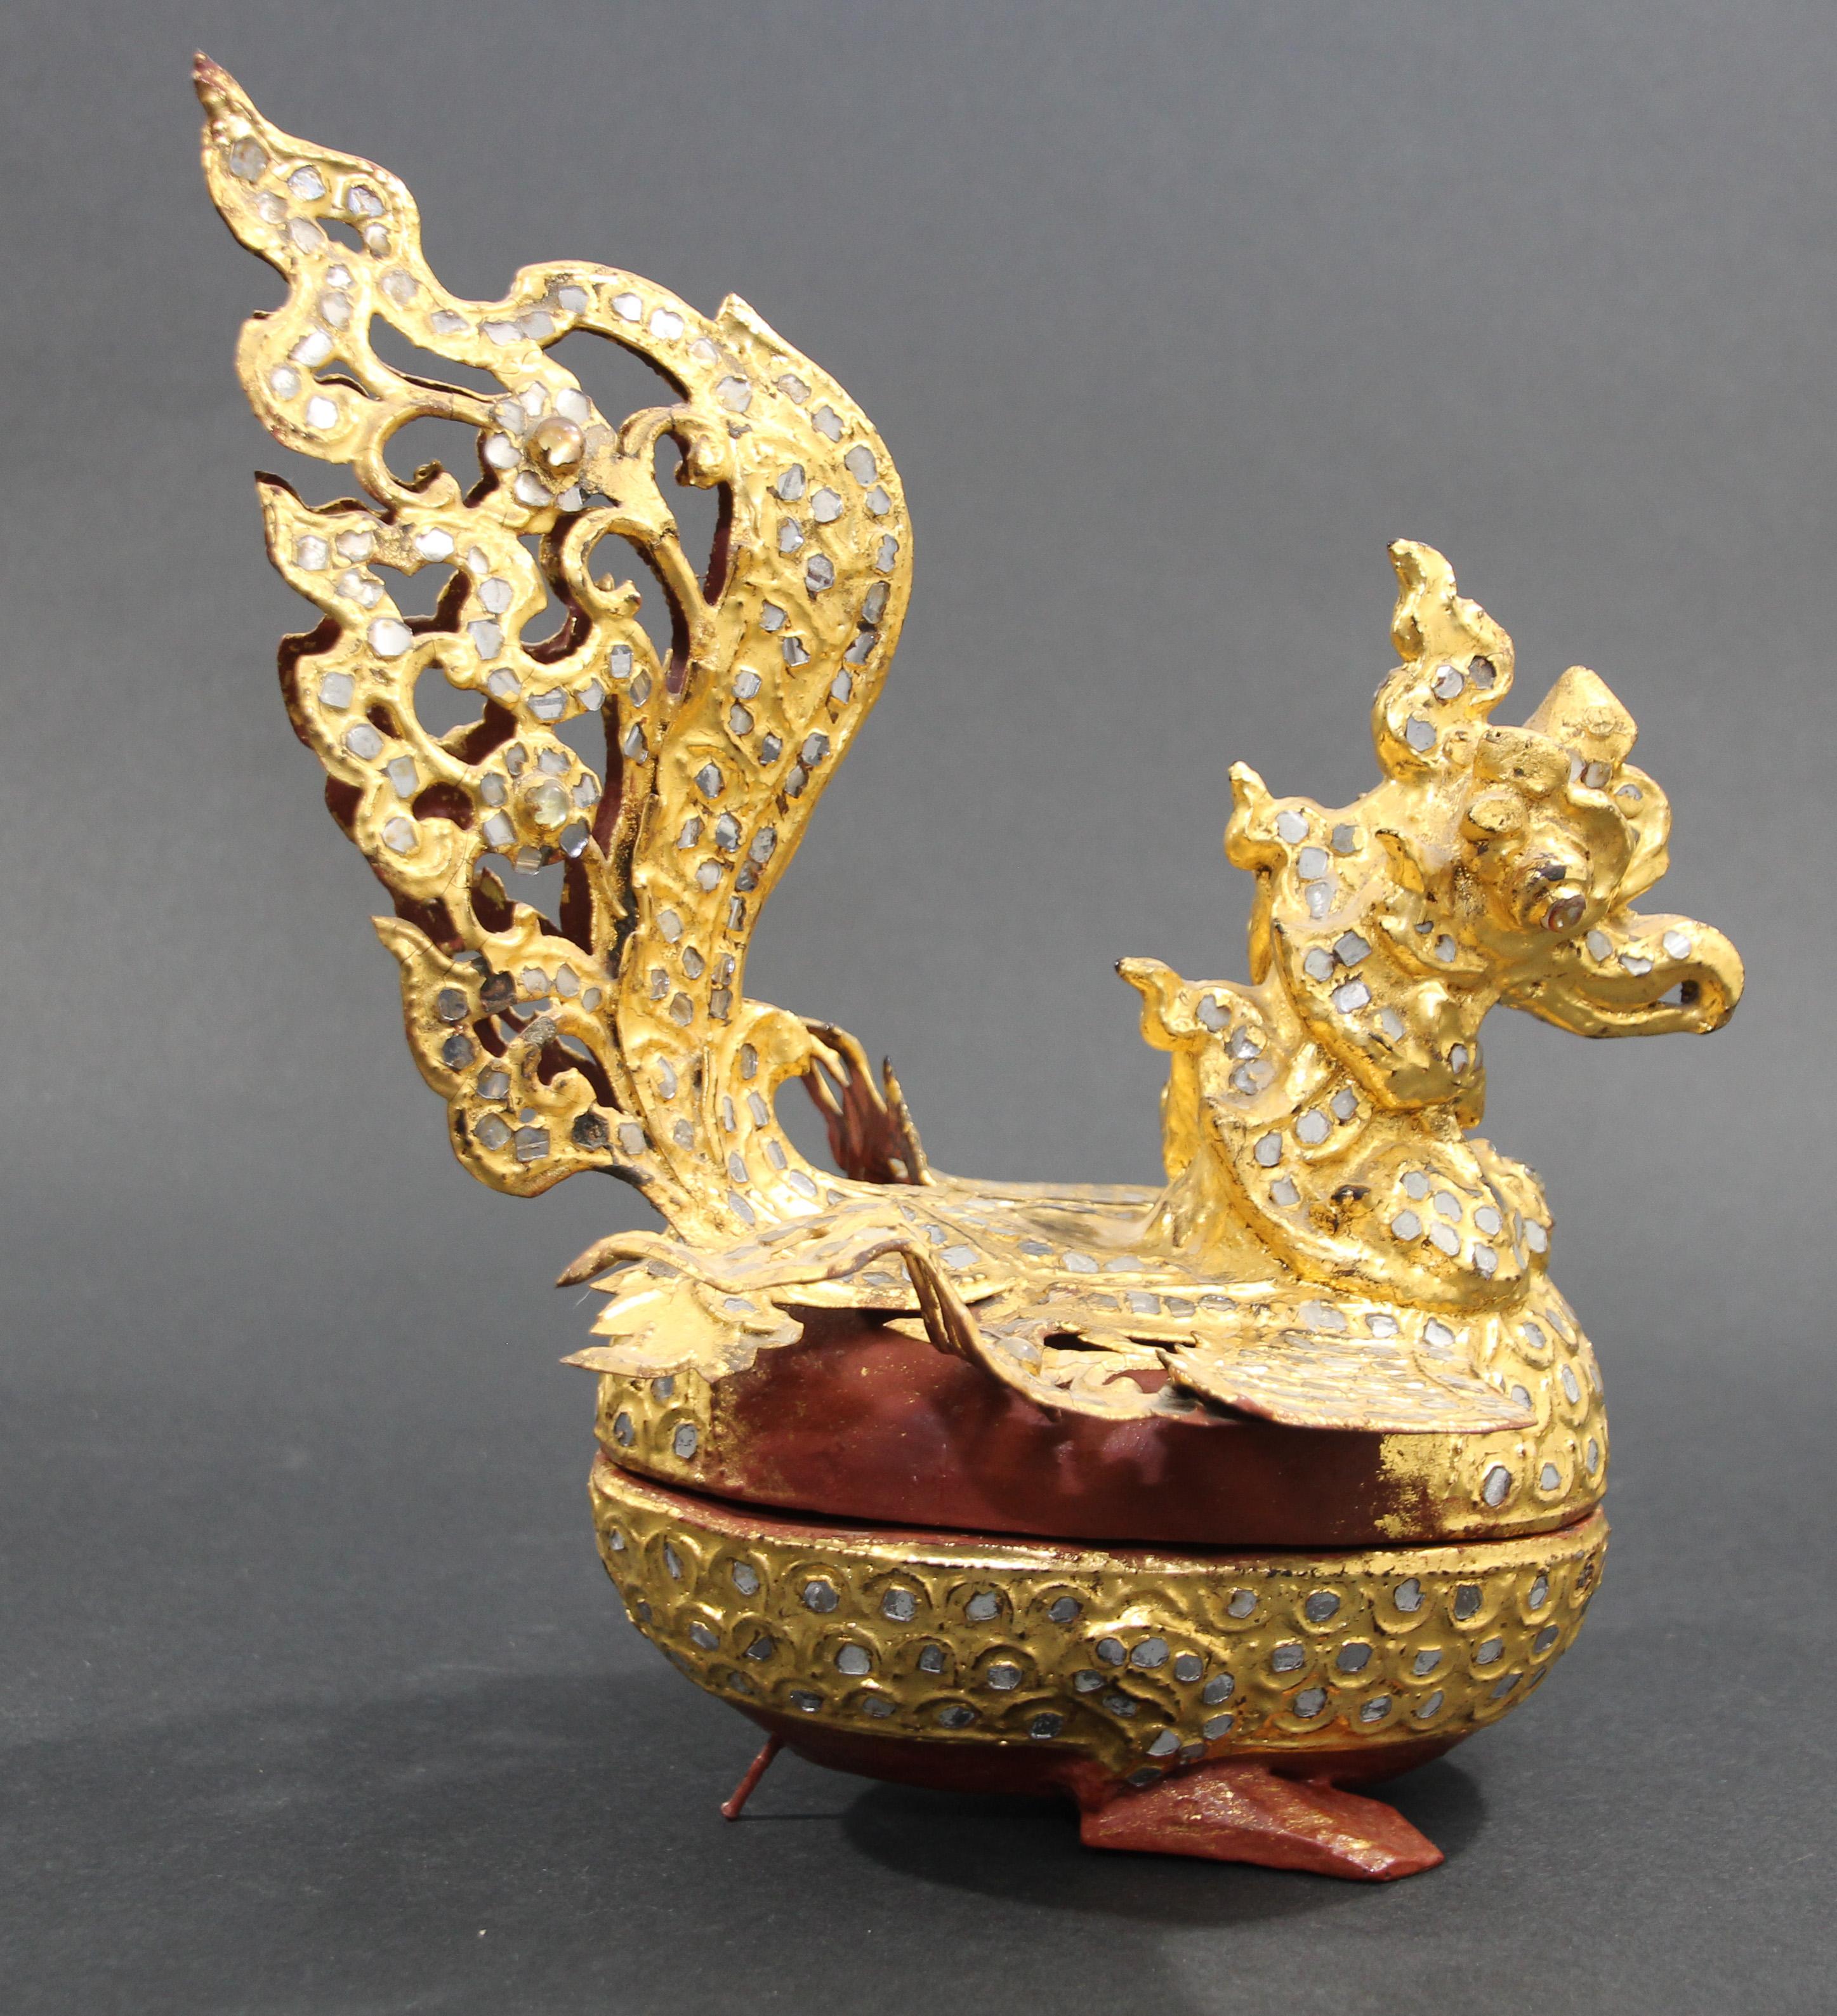 Antique late 19th century original offering vessel lacquered ornate gilded betel boxes in the shape of a sacred goose, Hintha bird from Mandalay, Myanmar bird 